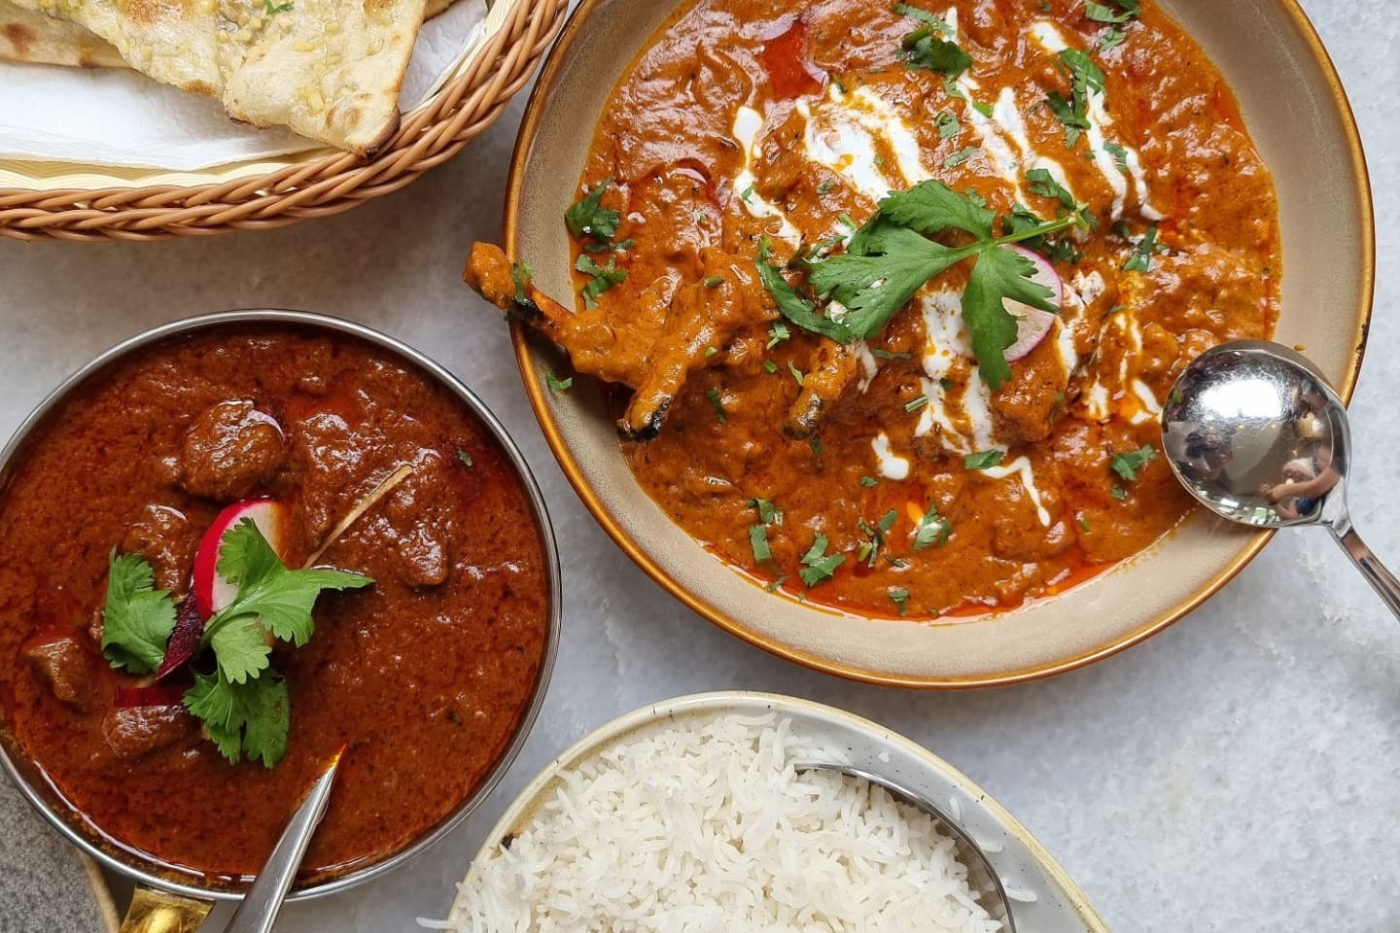 Overhead shot of two Indian curry dishes